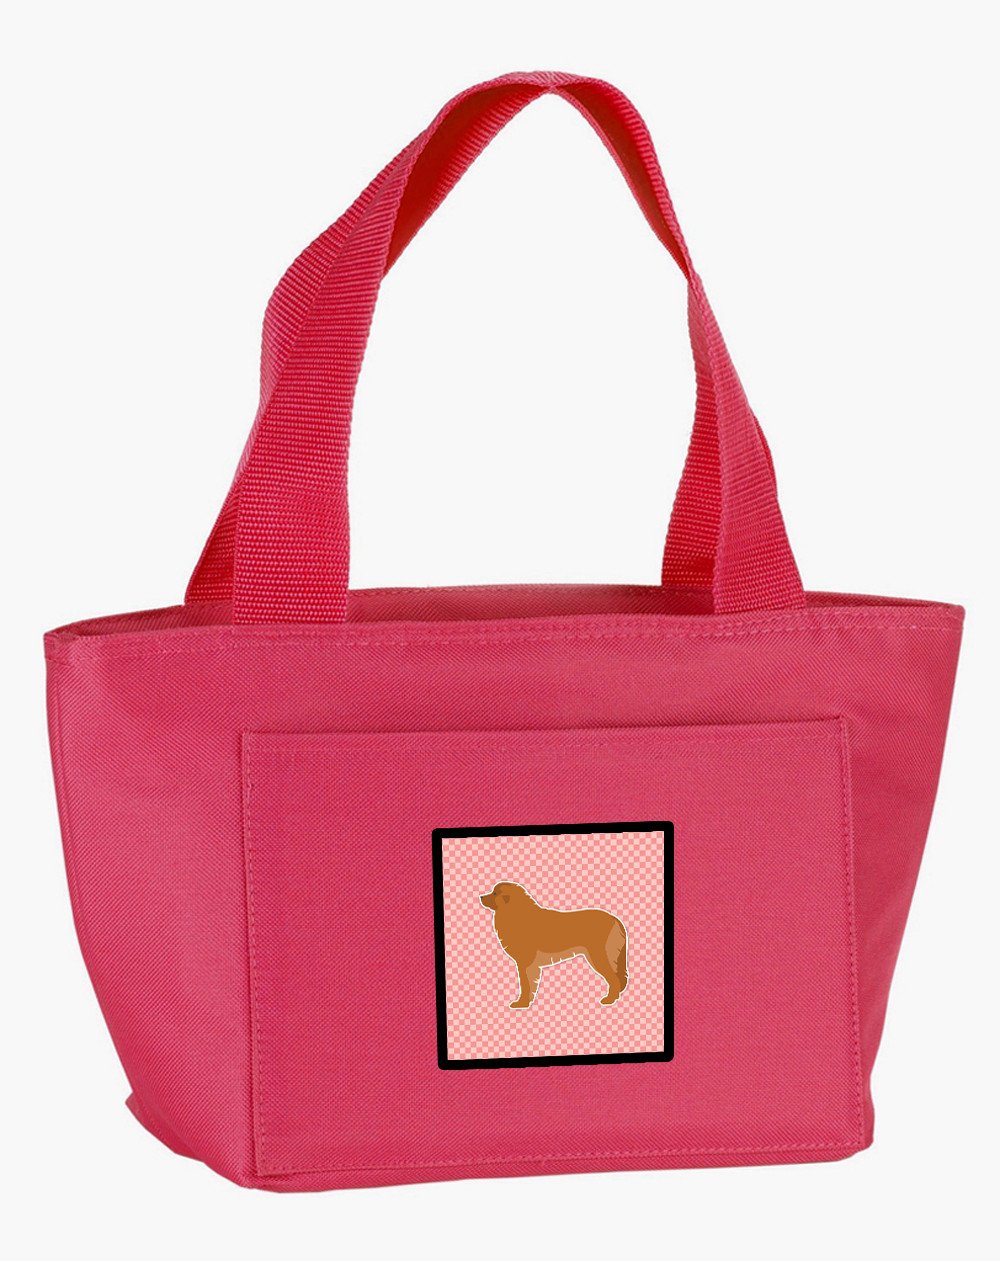 Leonberger Checkerboard Pink Lunch Bag BB3658PK-8808 by Caroline's Treasures